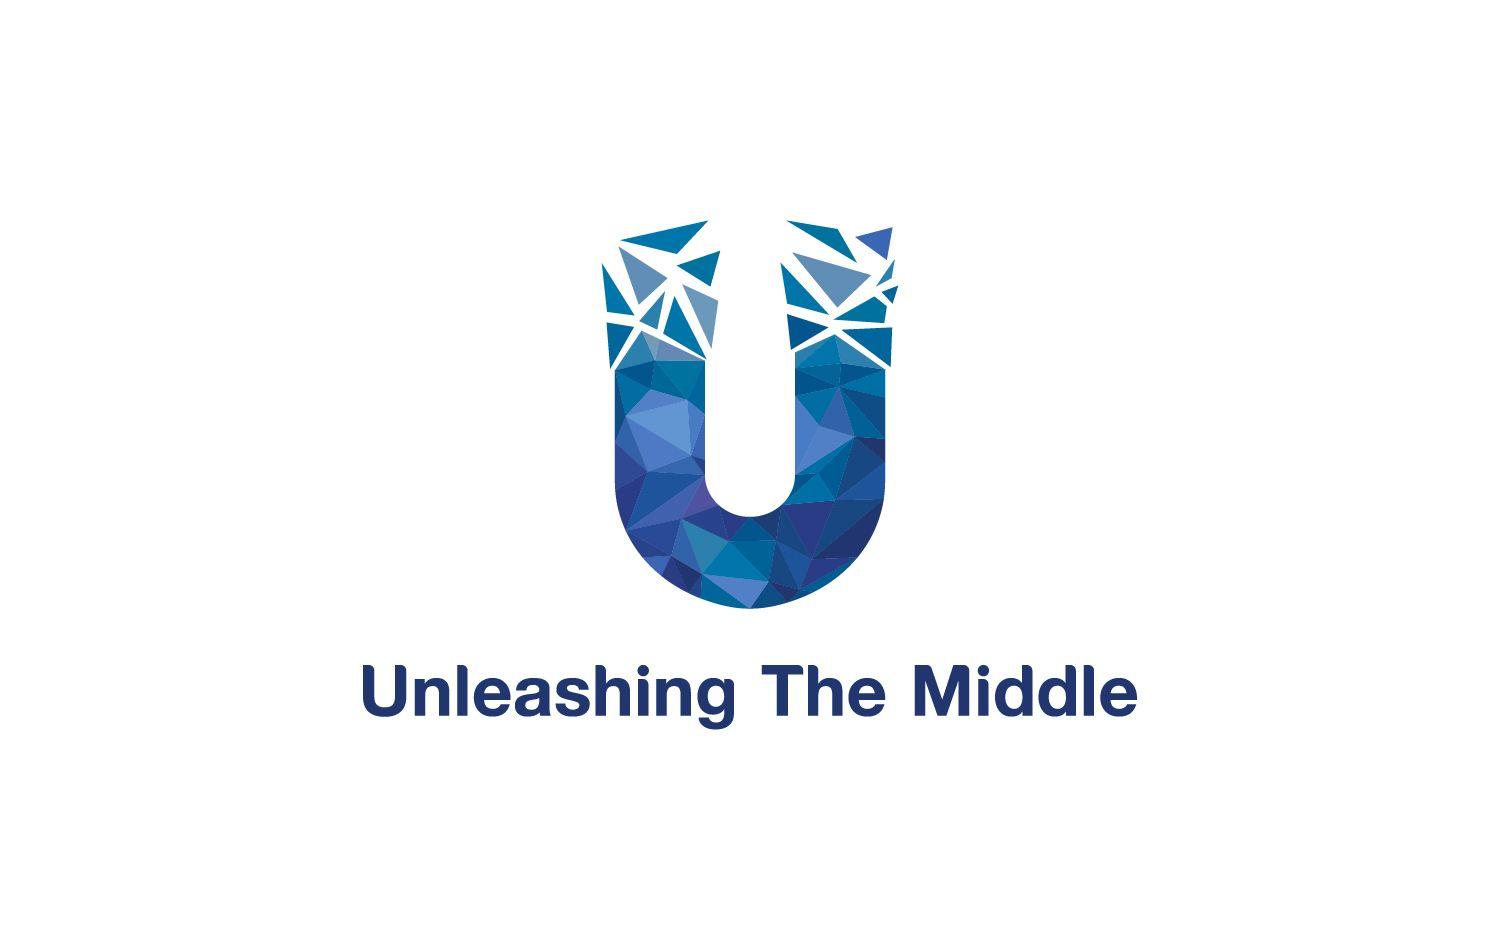 The Middle Logo - Modern, Bold, Leadership Logo Design for Unleashing the Middle or ...